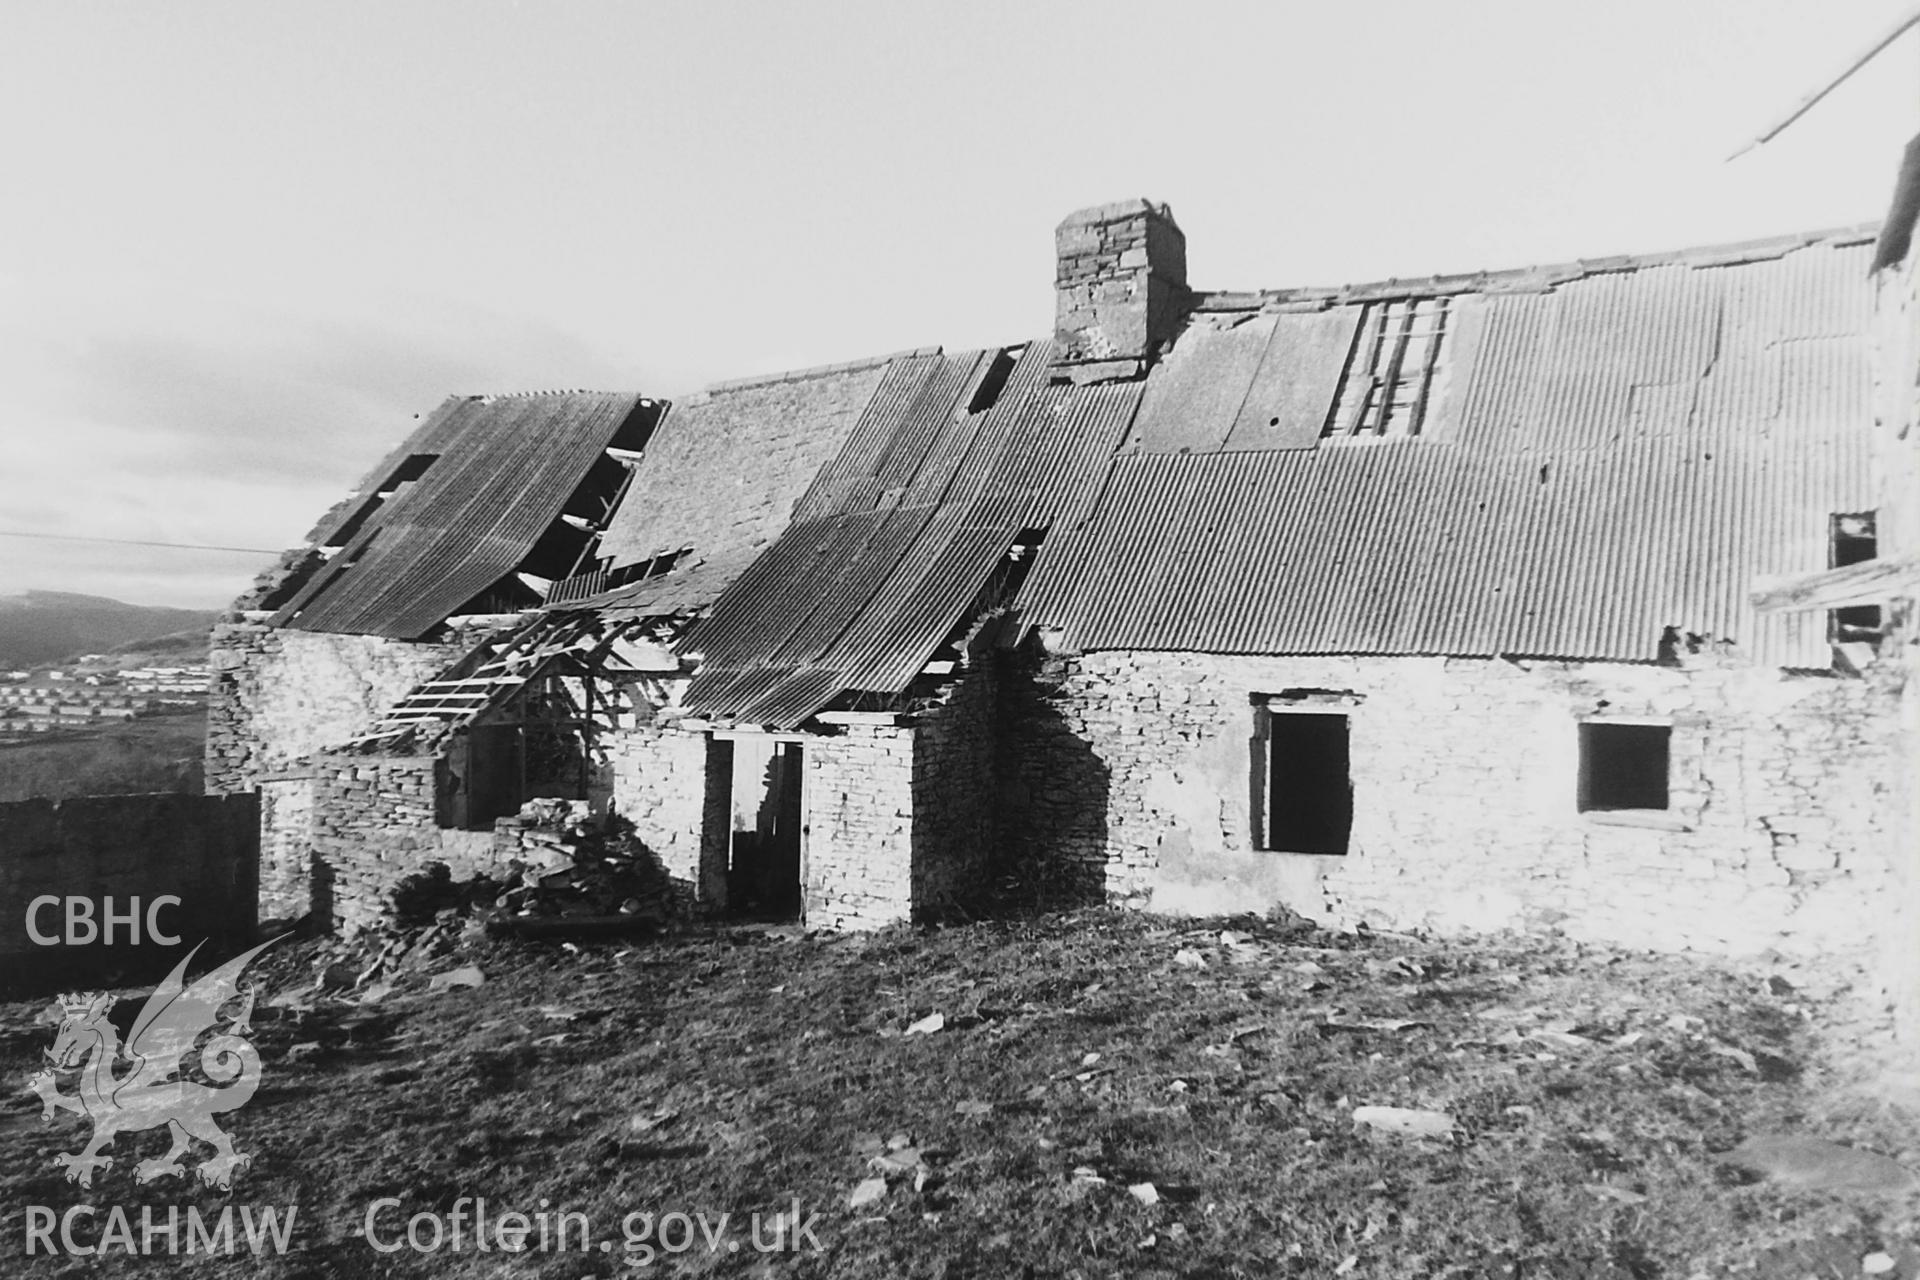 Black and white photo showing view of Llanhilleth Farm, taken by Paul R. Davis, 1999.